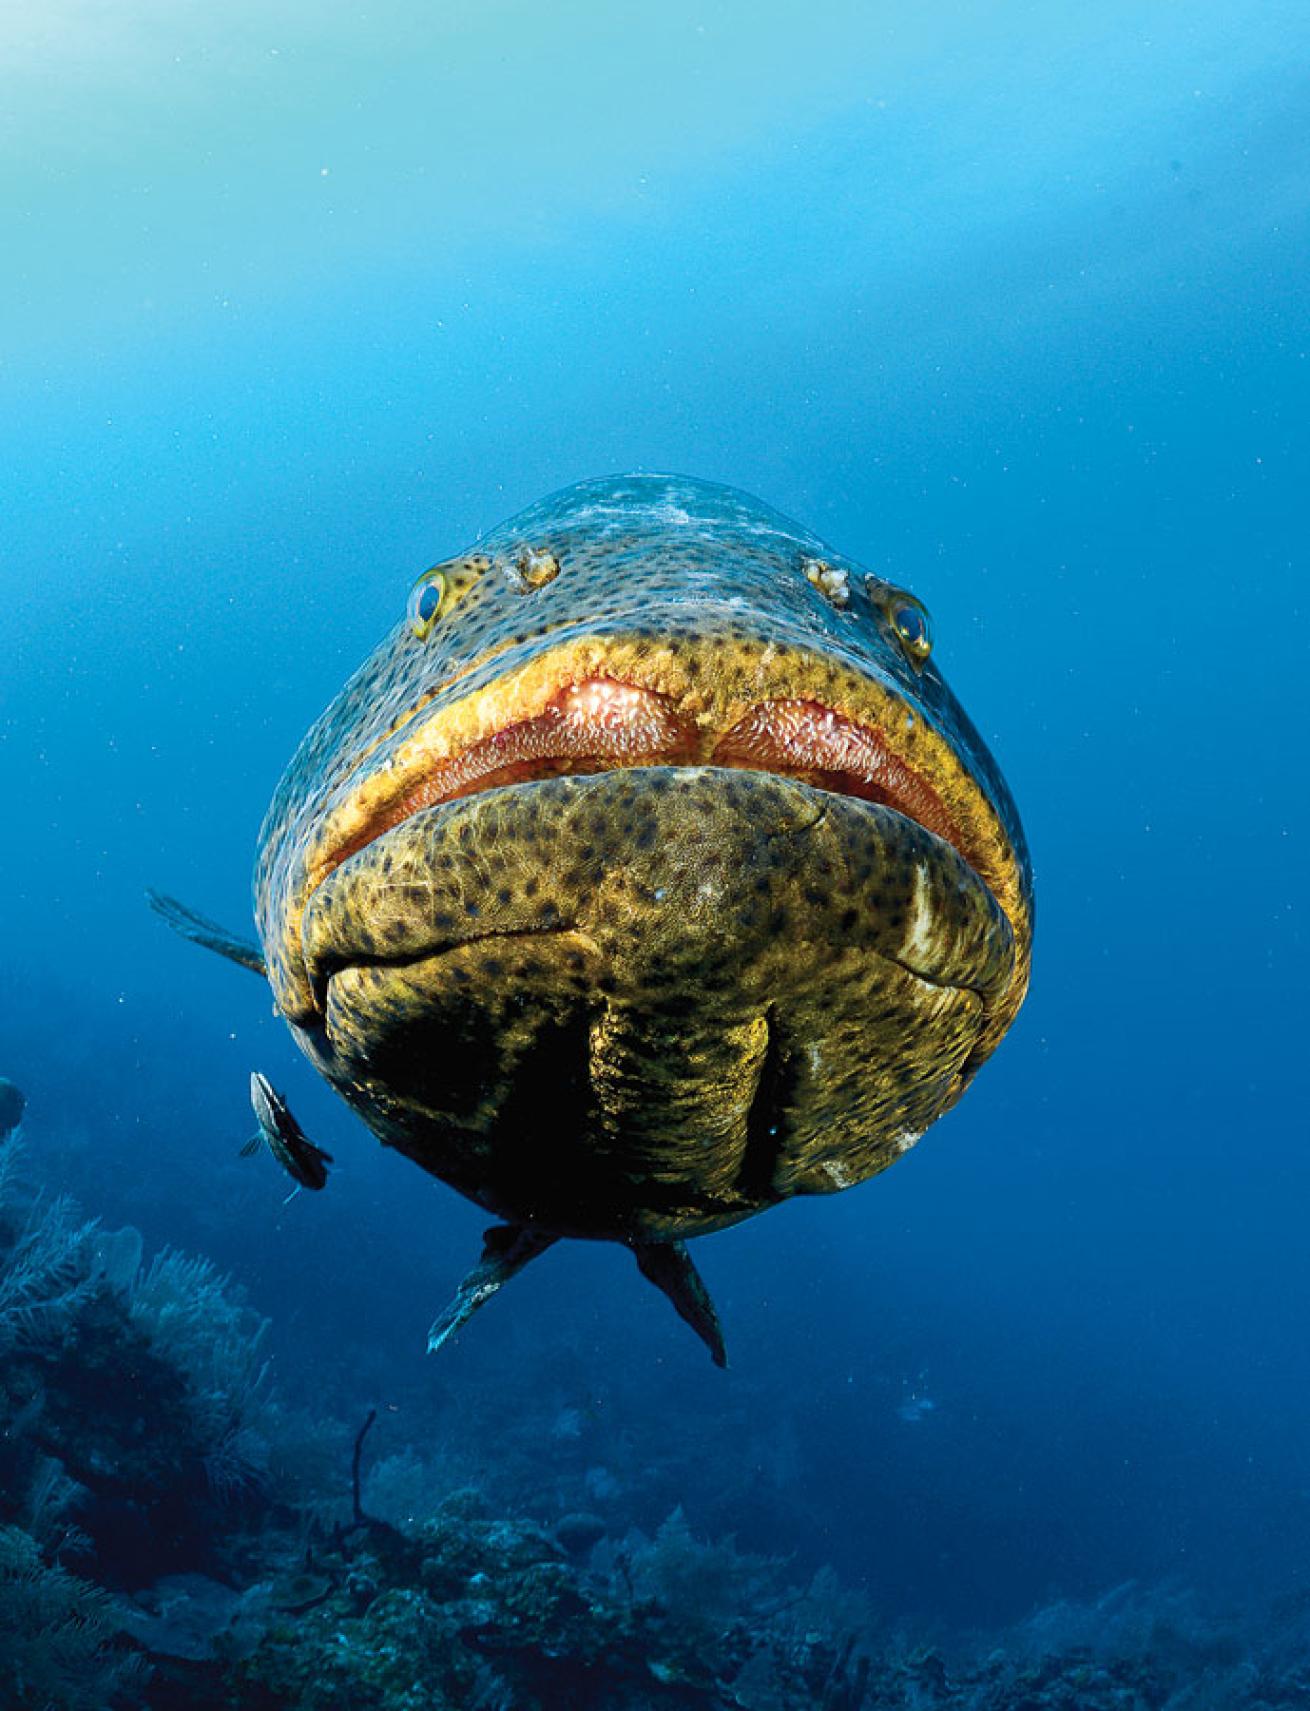 Goliath grouper can be found in Cuba's Gardens of the Queen